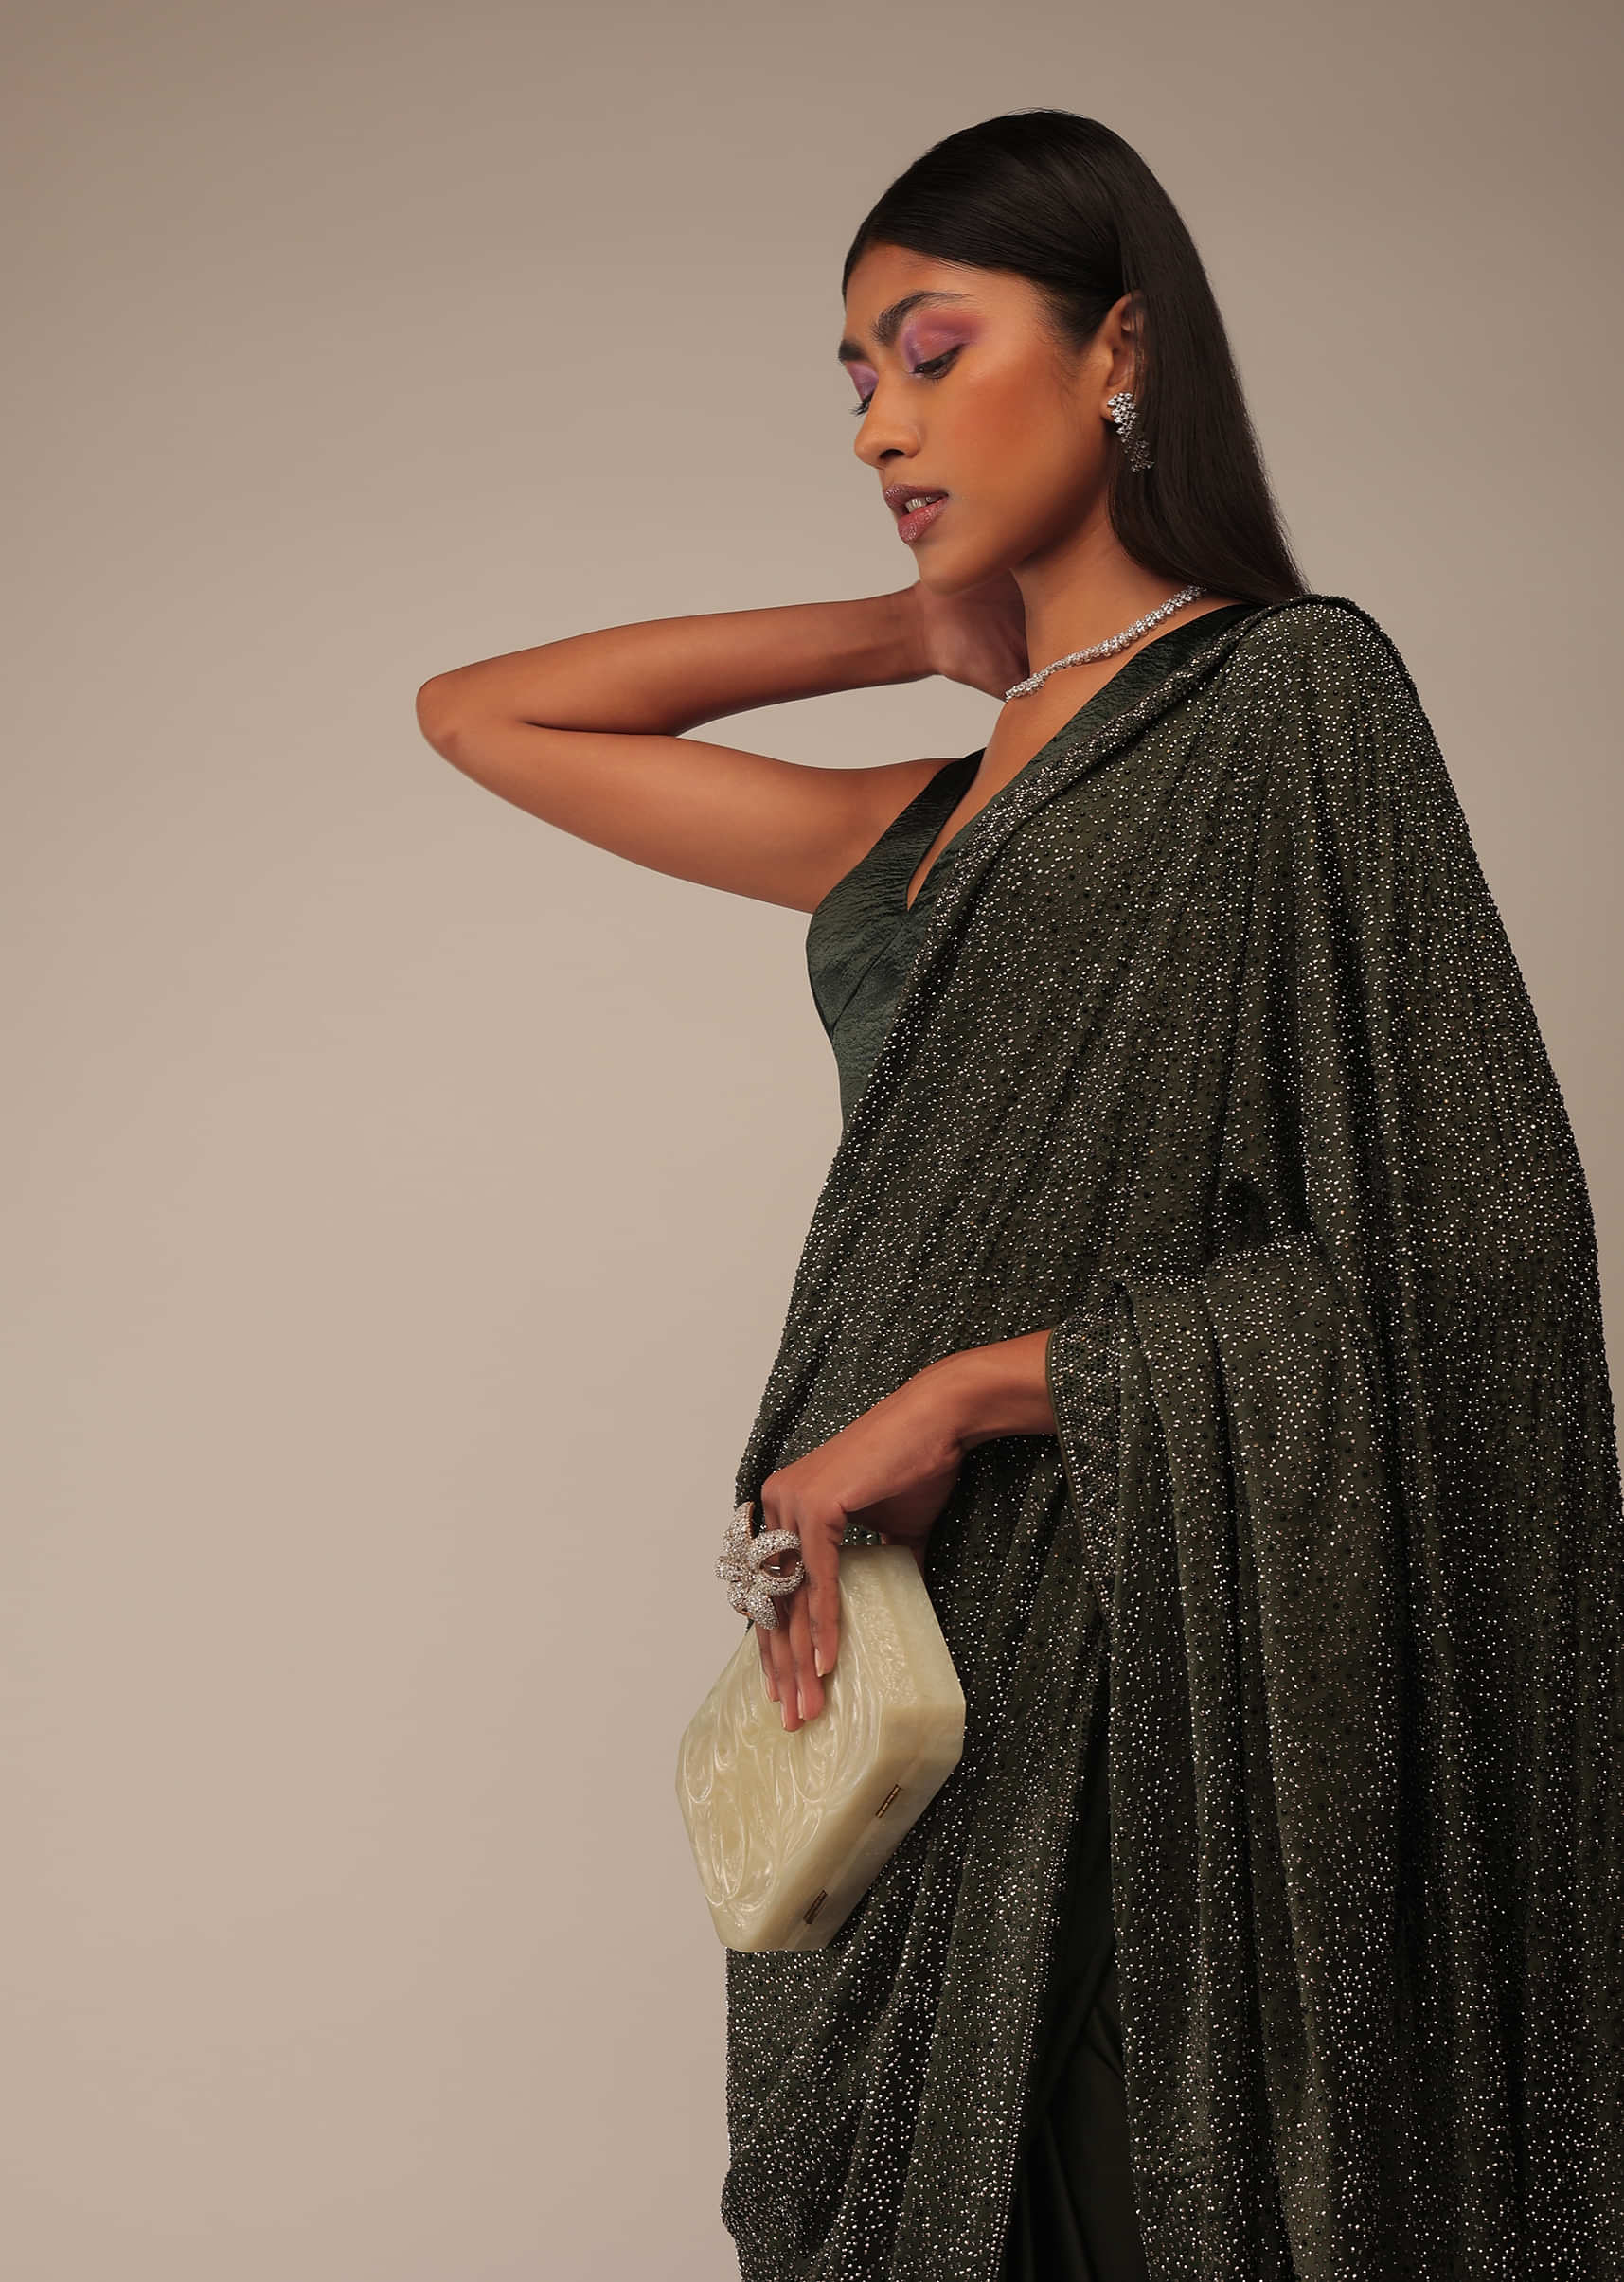 Grape Leaf Saree In Stone Embellishment, Crafted In Satin With Scattered Stones In Geometric Design